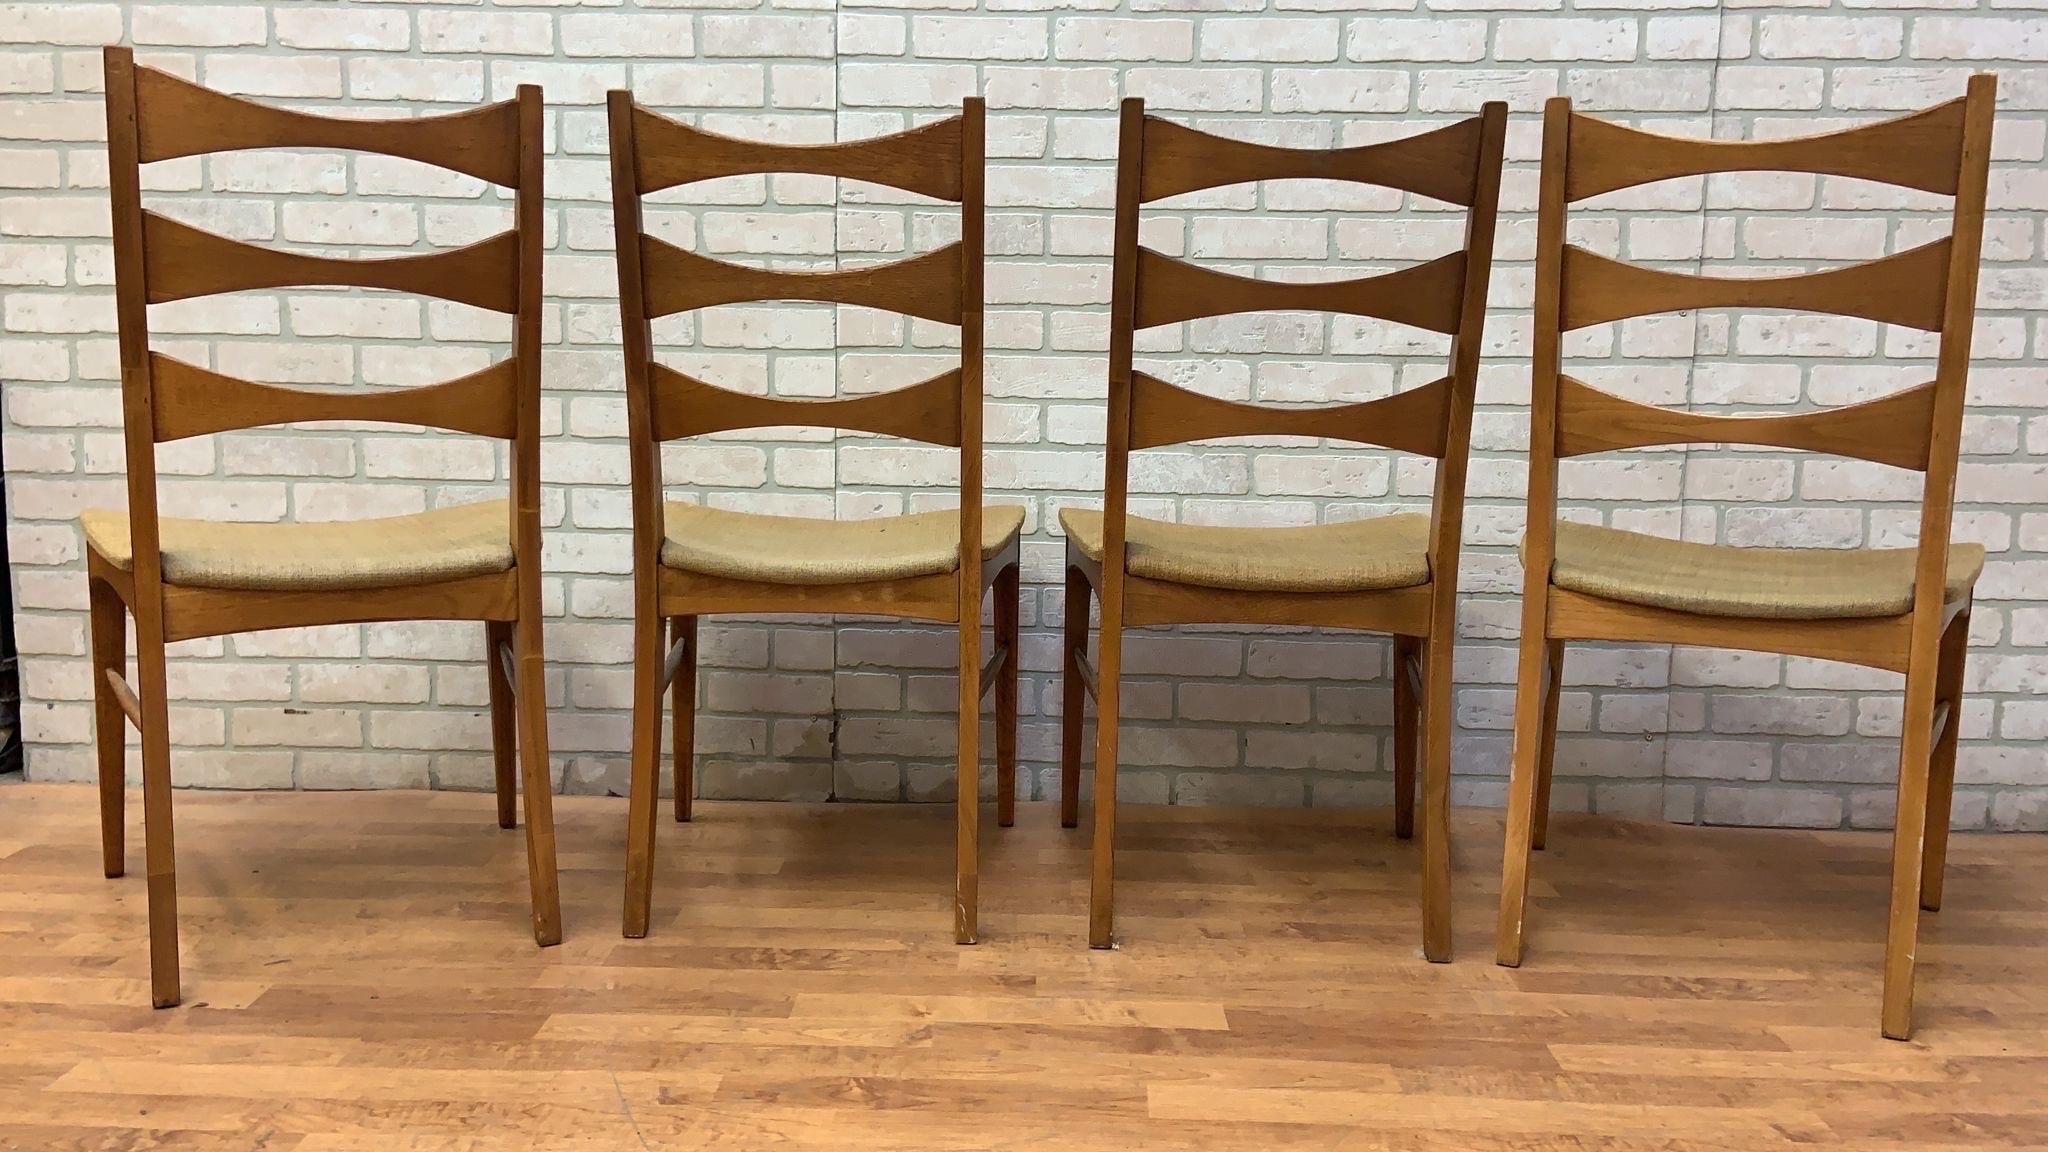 Mid Century Modern Lane Rhythm Walnut Ladder Back Side Chairs - Set of 4

Timeless Walnut Chairs from the Lane Company that will be sure to heighten any dining area. These Ladder Back Side Chairs from the Rhythm Collection for Lane are constructed